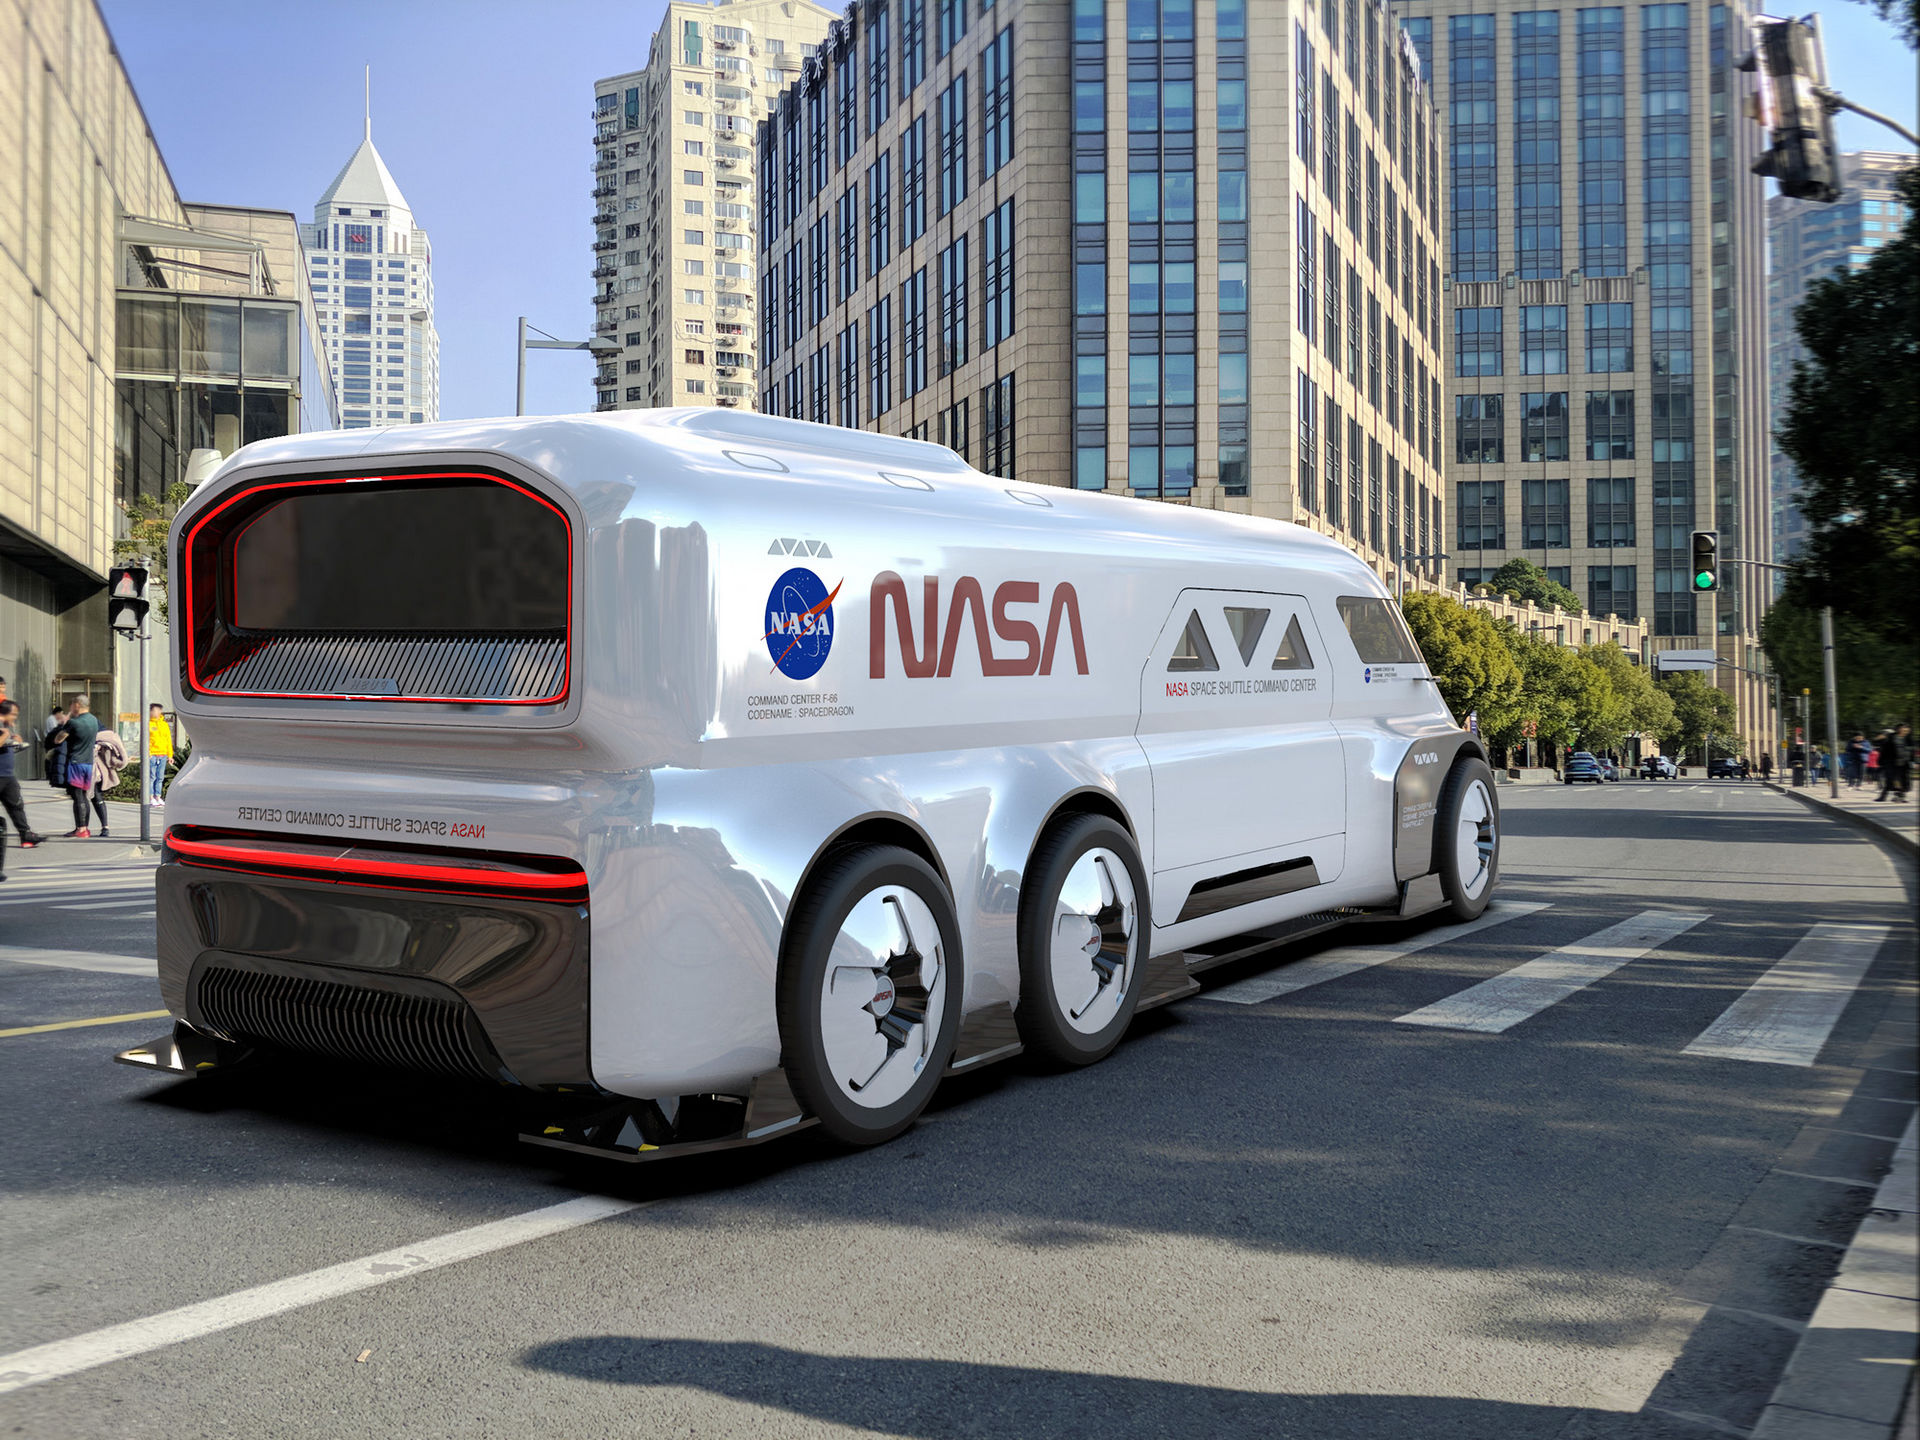 Now Here's An Appropriate NASA Astronaut Transport Study For The Future